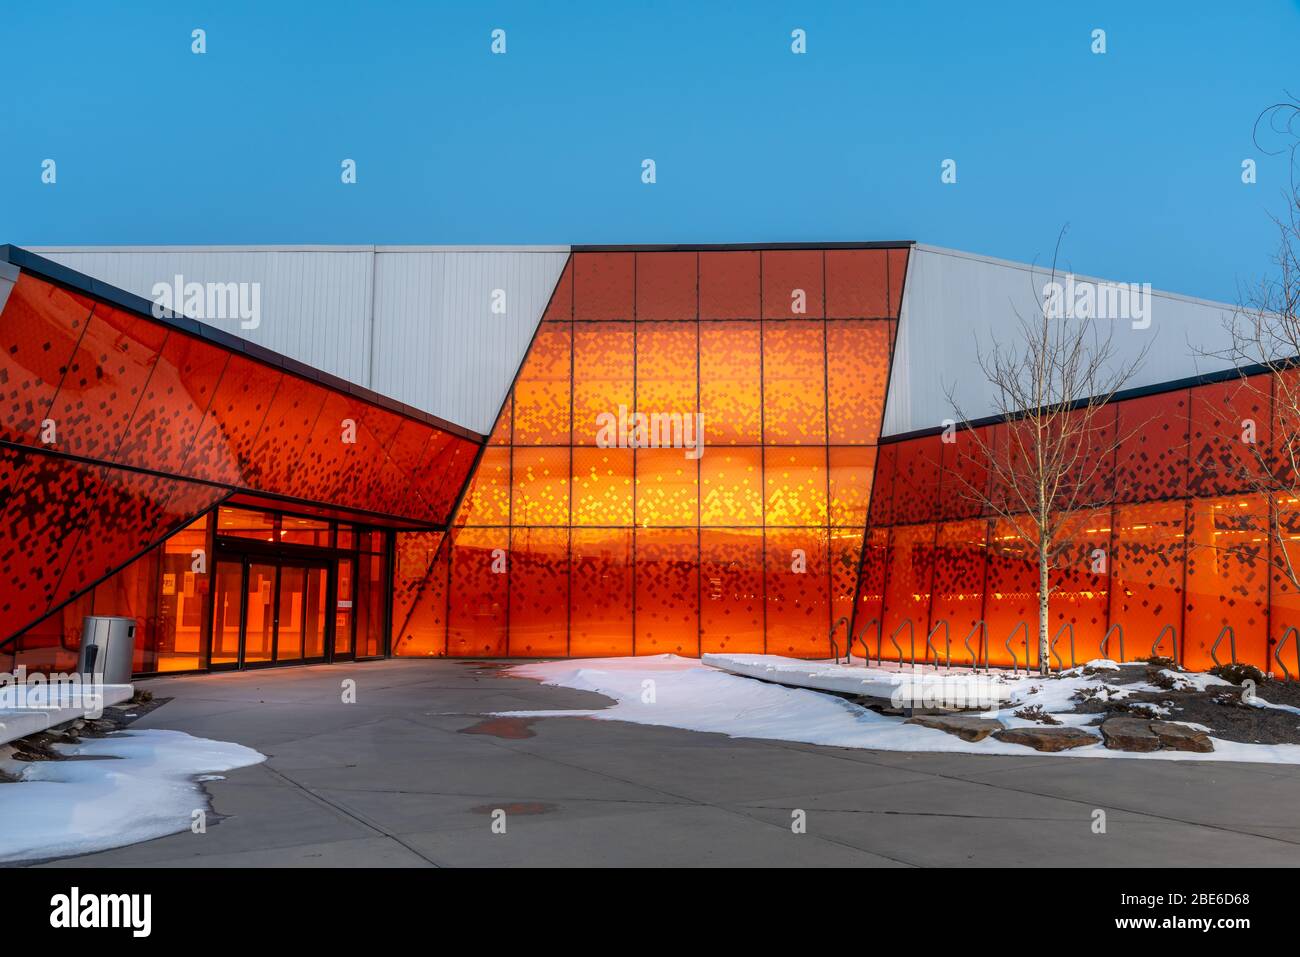 The Great Plains Recreation Centre in Calgary, Alberta on April 12, 2020. The Great Plains is a new hockey arena in south-east Calgary. Stock Photo